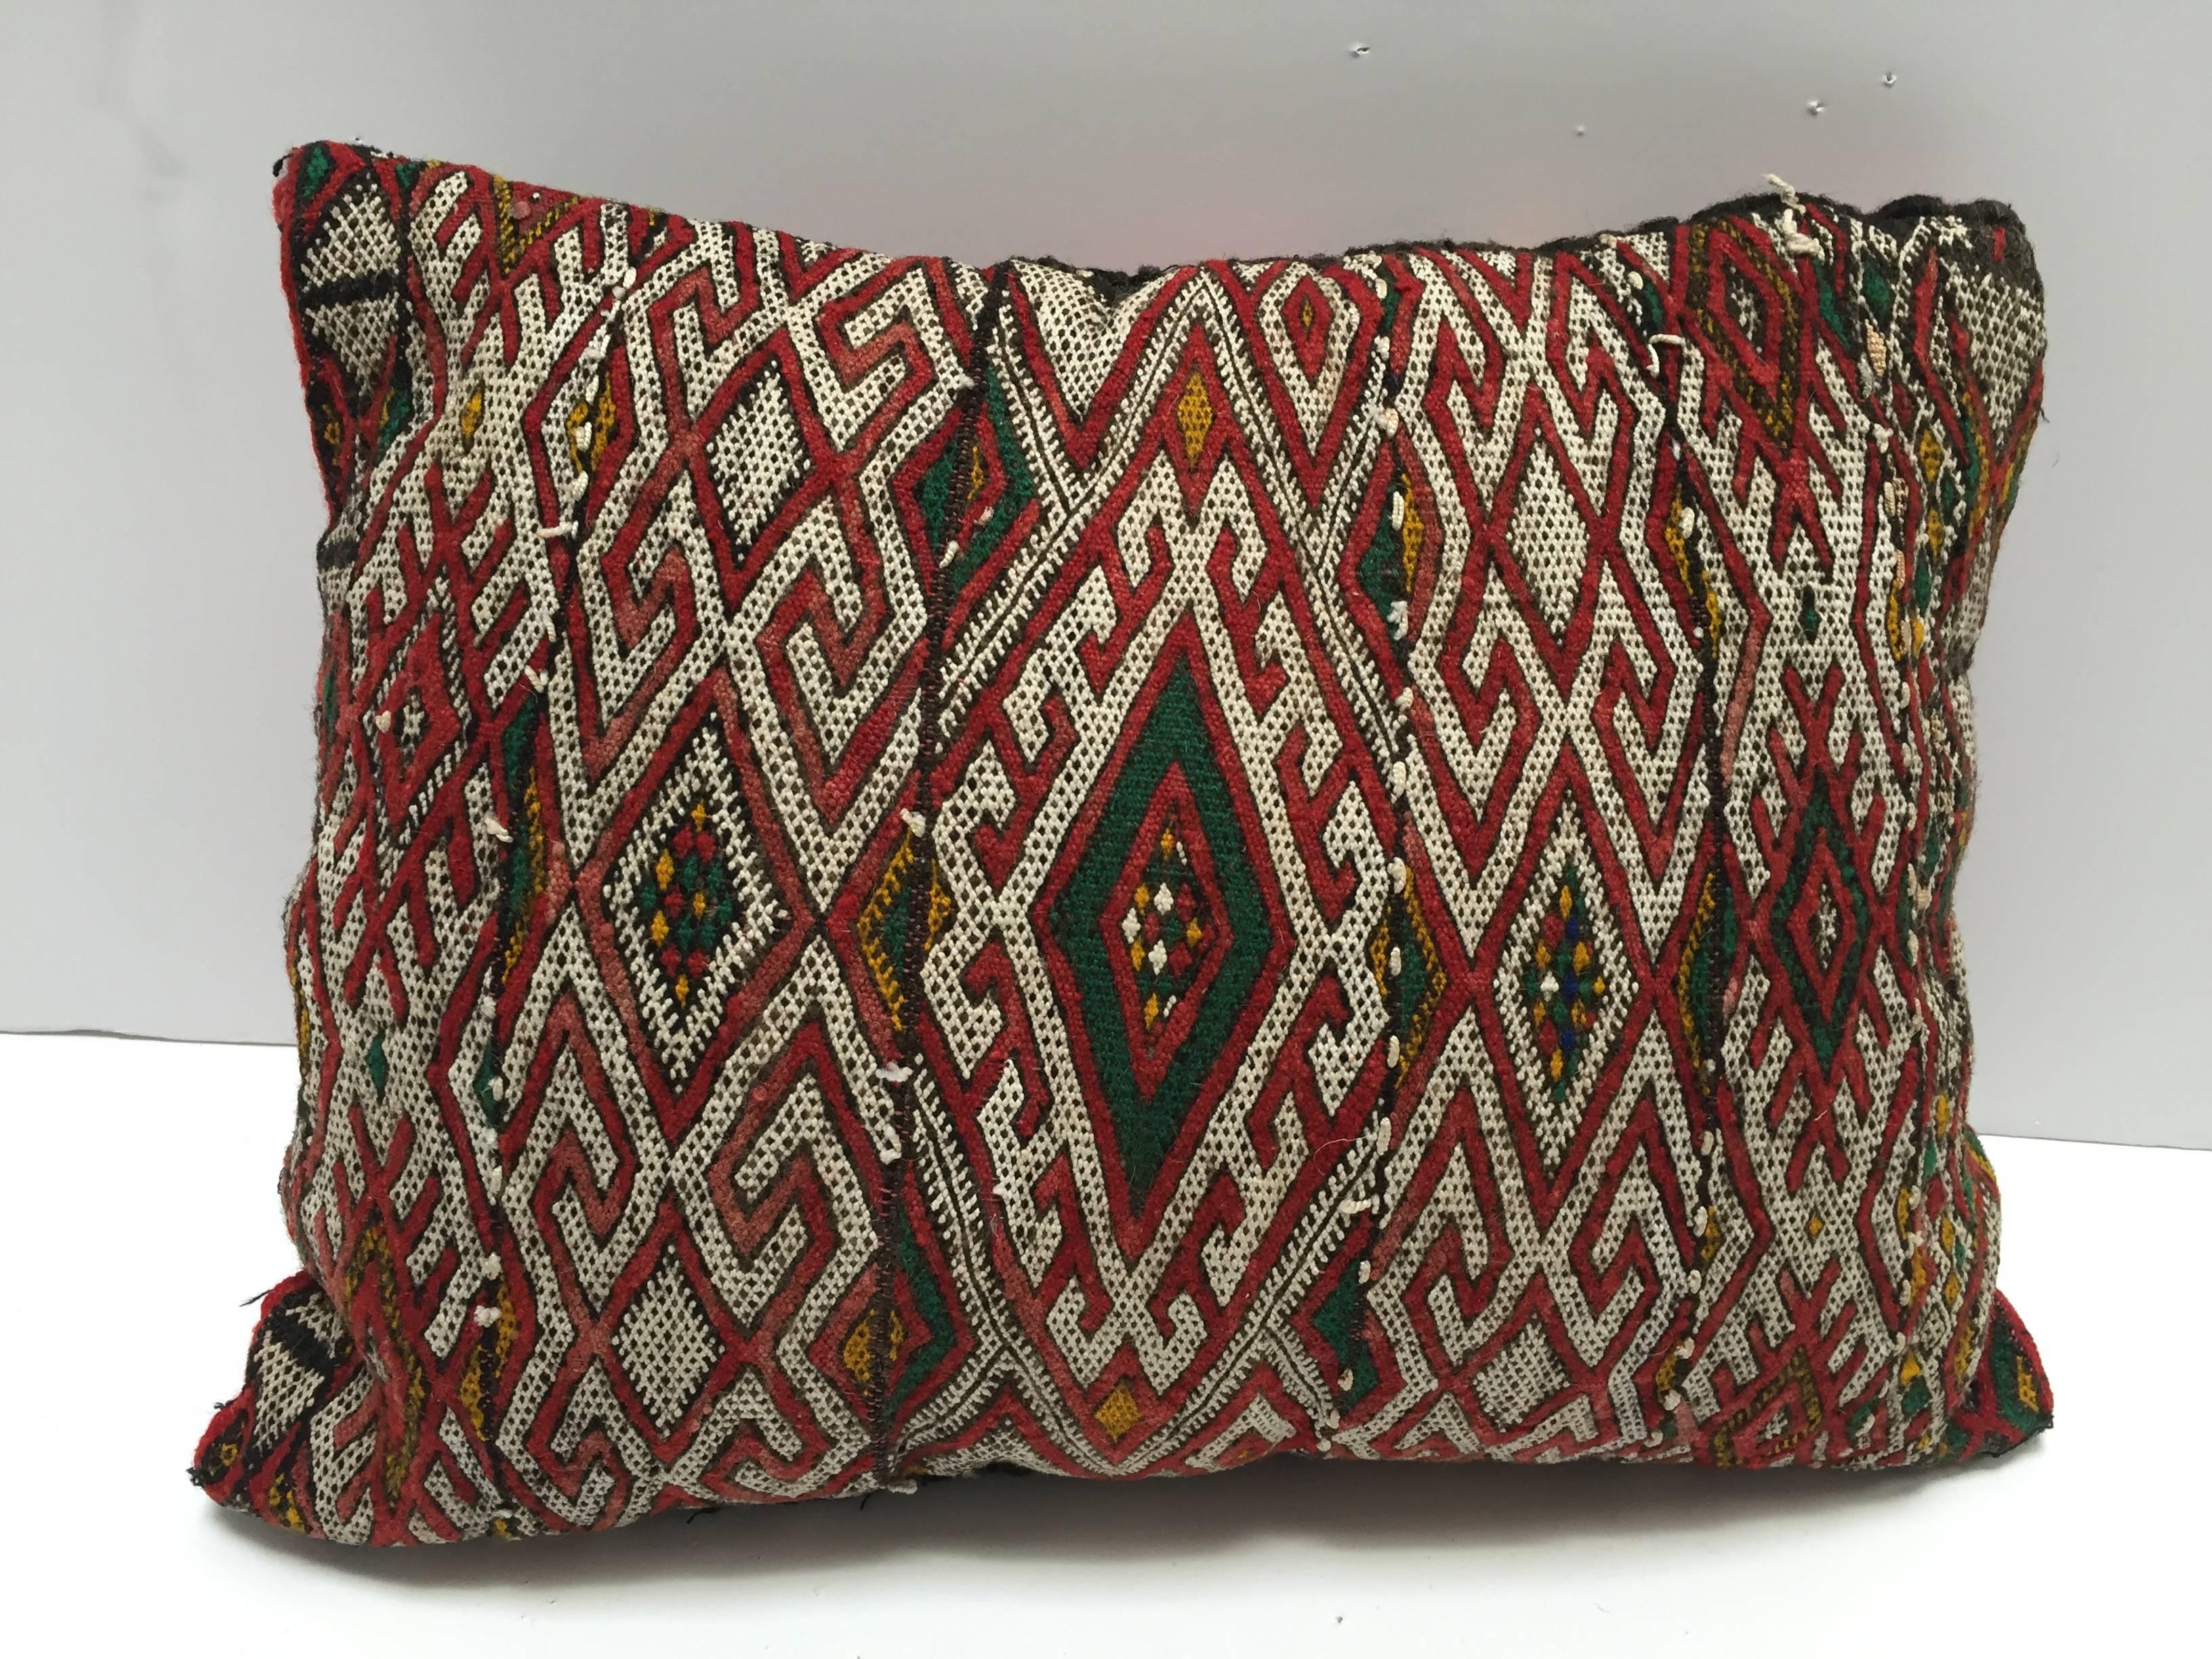 20th Century Moroccan Berber Handwoven Tribal Throw Pillow Made from a Vintage Rug